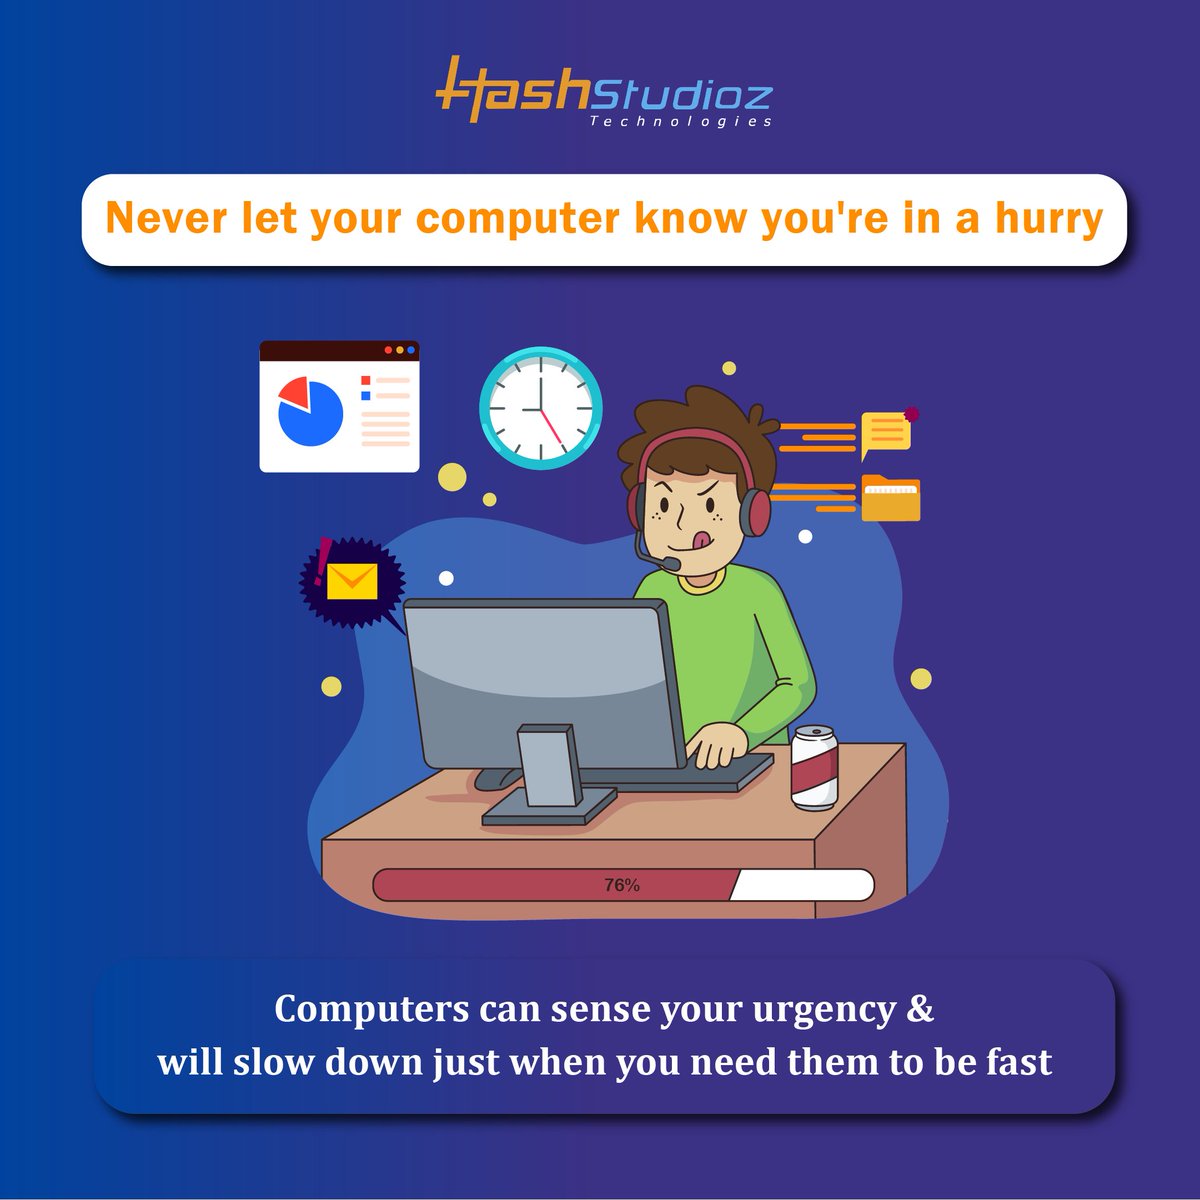 Ever noticed how your computer mysteriously slows down when you're in a rush? It's like they have a sixth sense of urgency! Patience is key when it comes to technology! 🕰️ Take a deep breath and watch it magically speed up when you least expect it. 

#TechHumor #TechStruggles